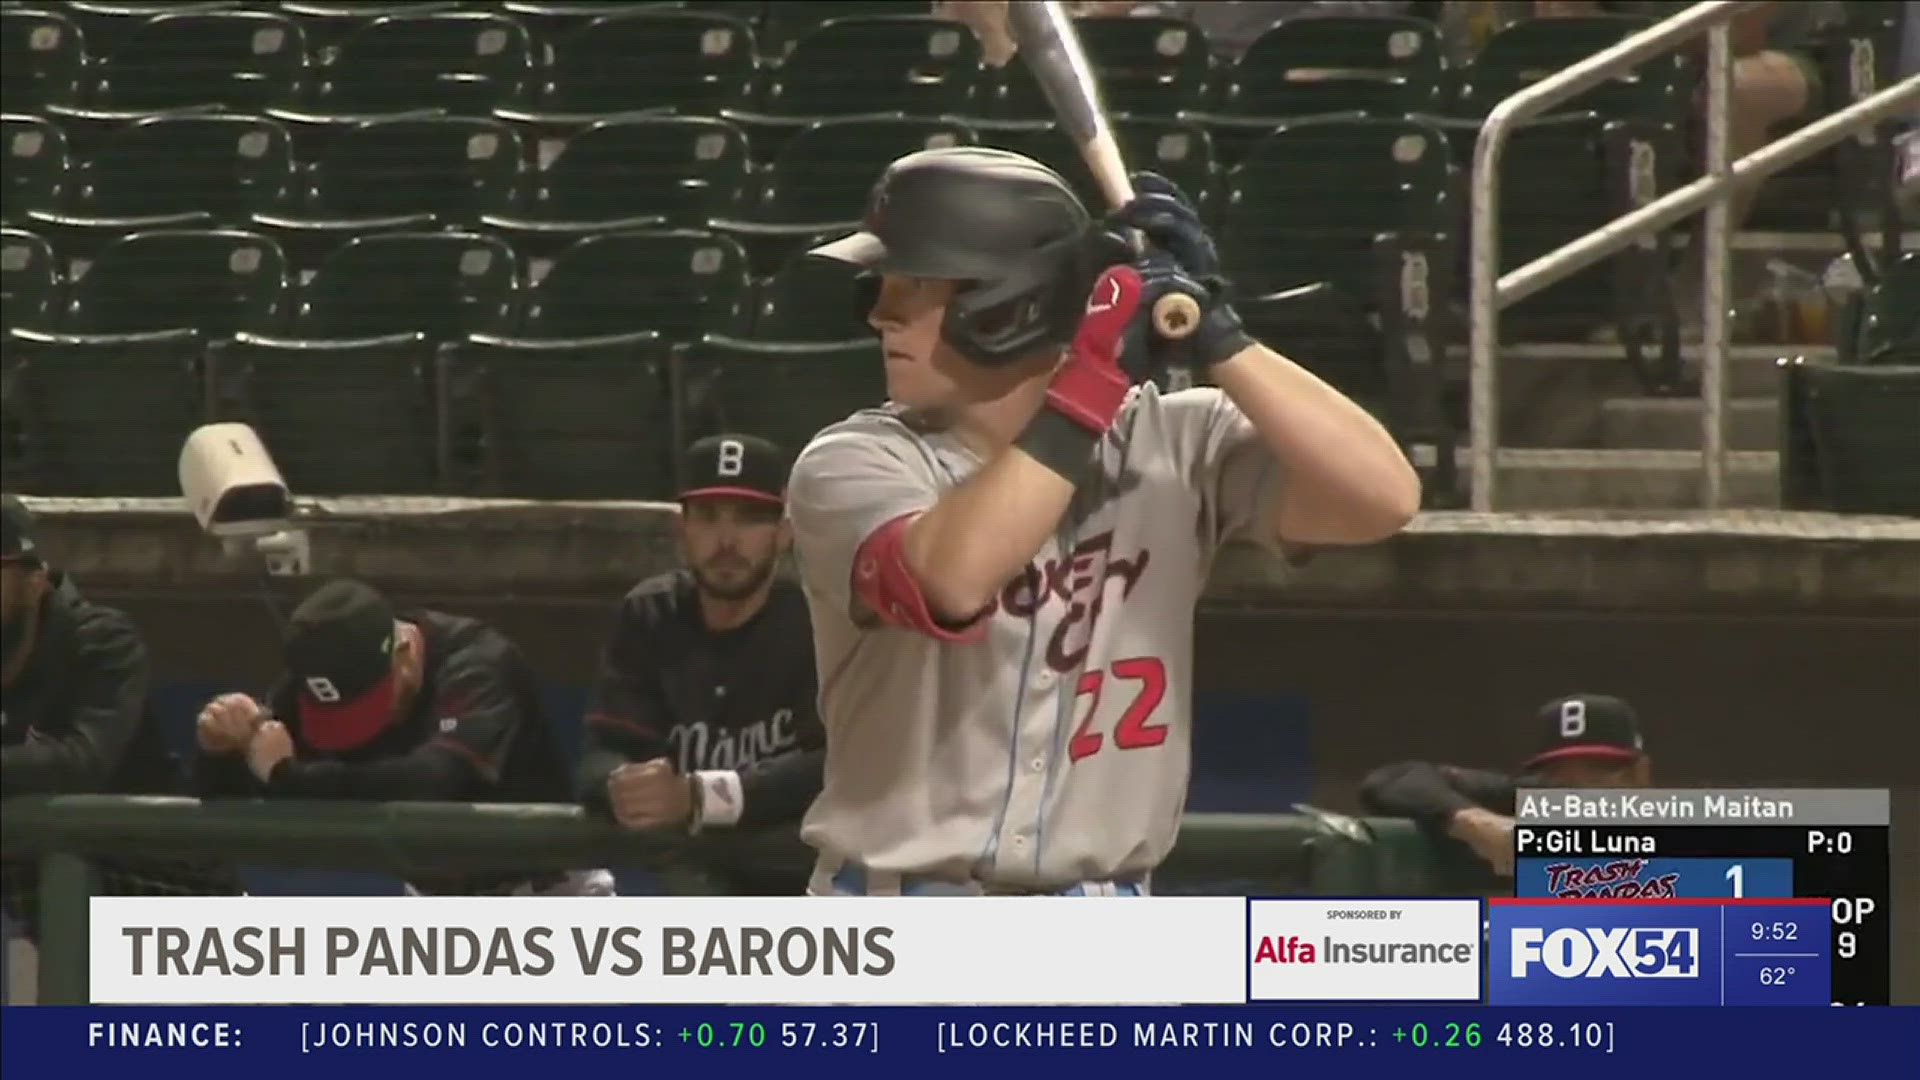 The Rocket City Trash Pandas rallied late to tie the game but were unable to produce in extra innings in a 3-2 loss to the Birmingham Barons